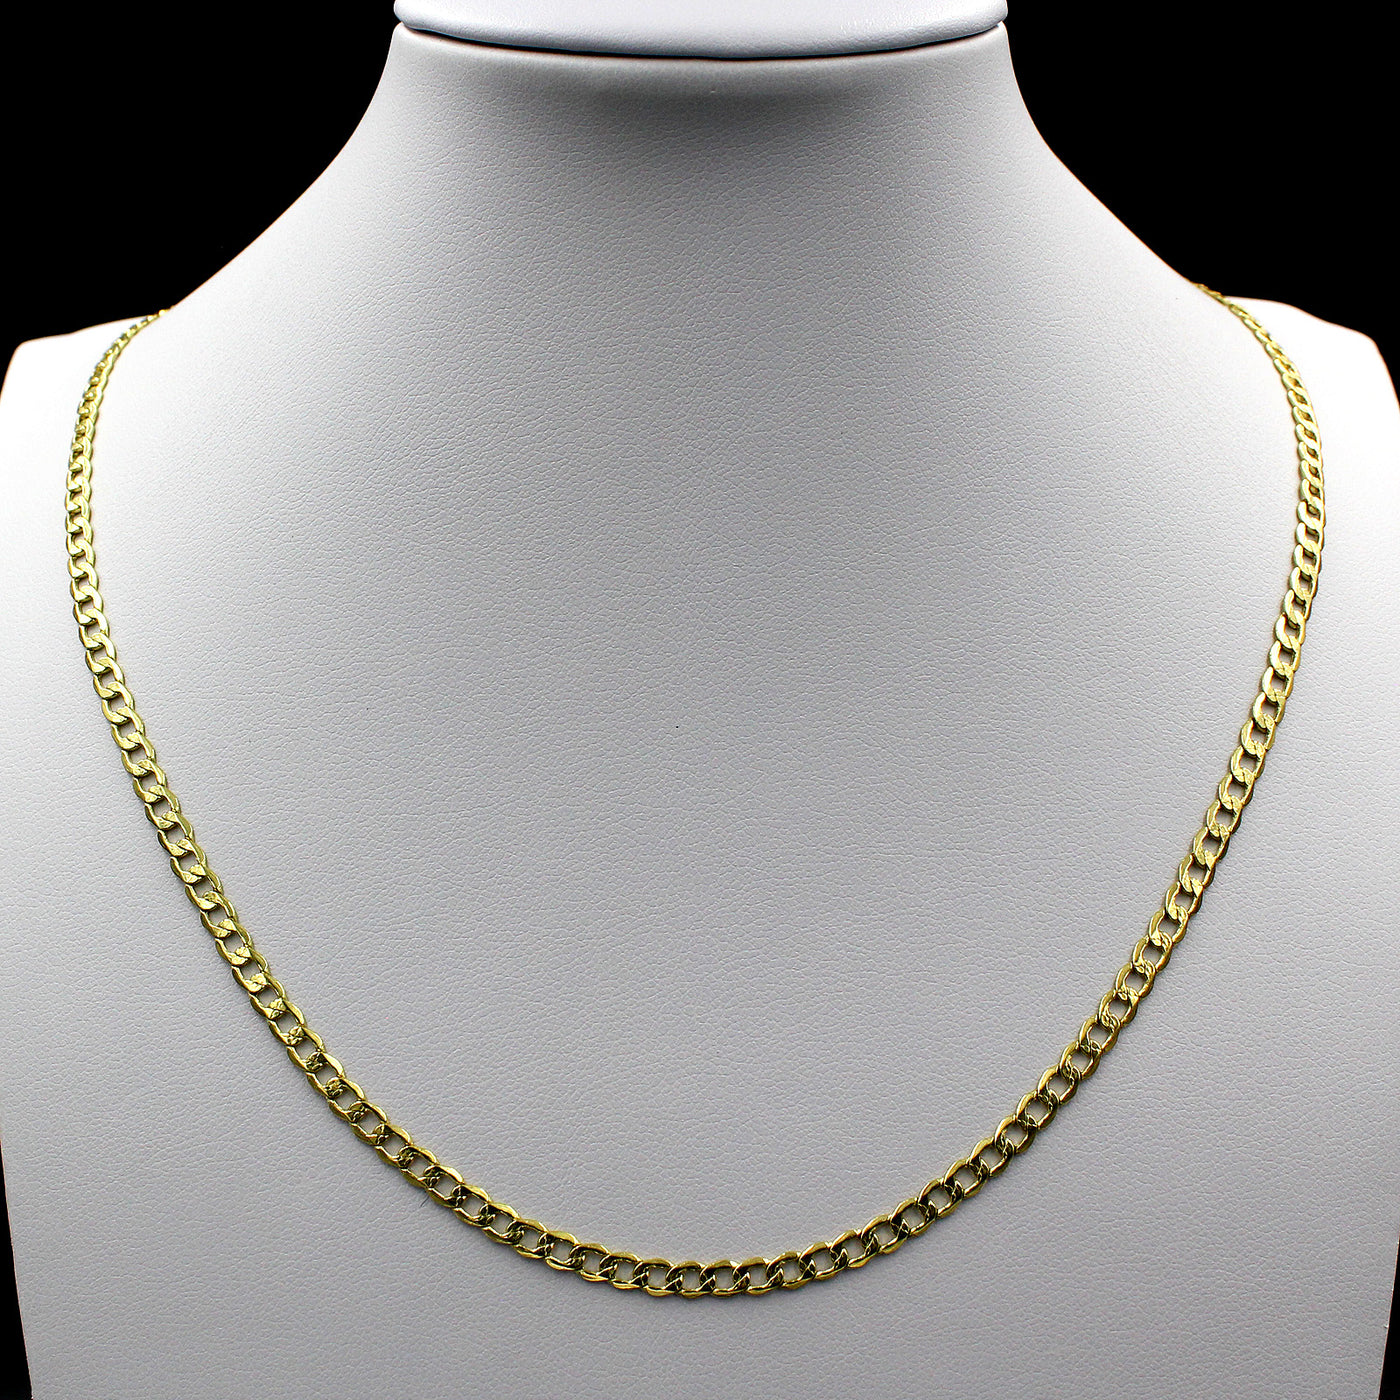 10K Yellow Gold 2mm - 6.5mm Cuban Curb Link Chain Pendant Necklace 14" - 30"